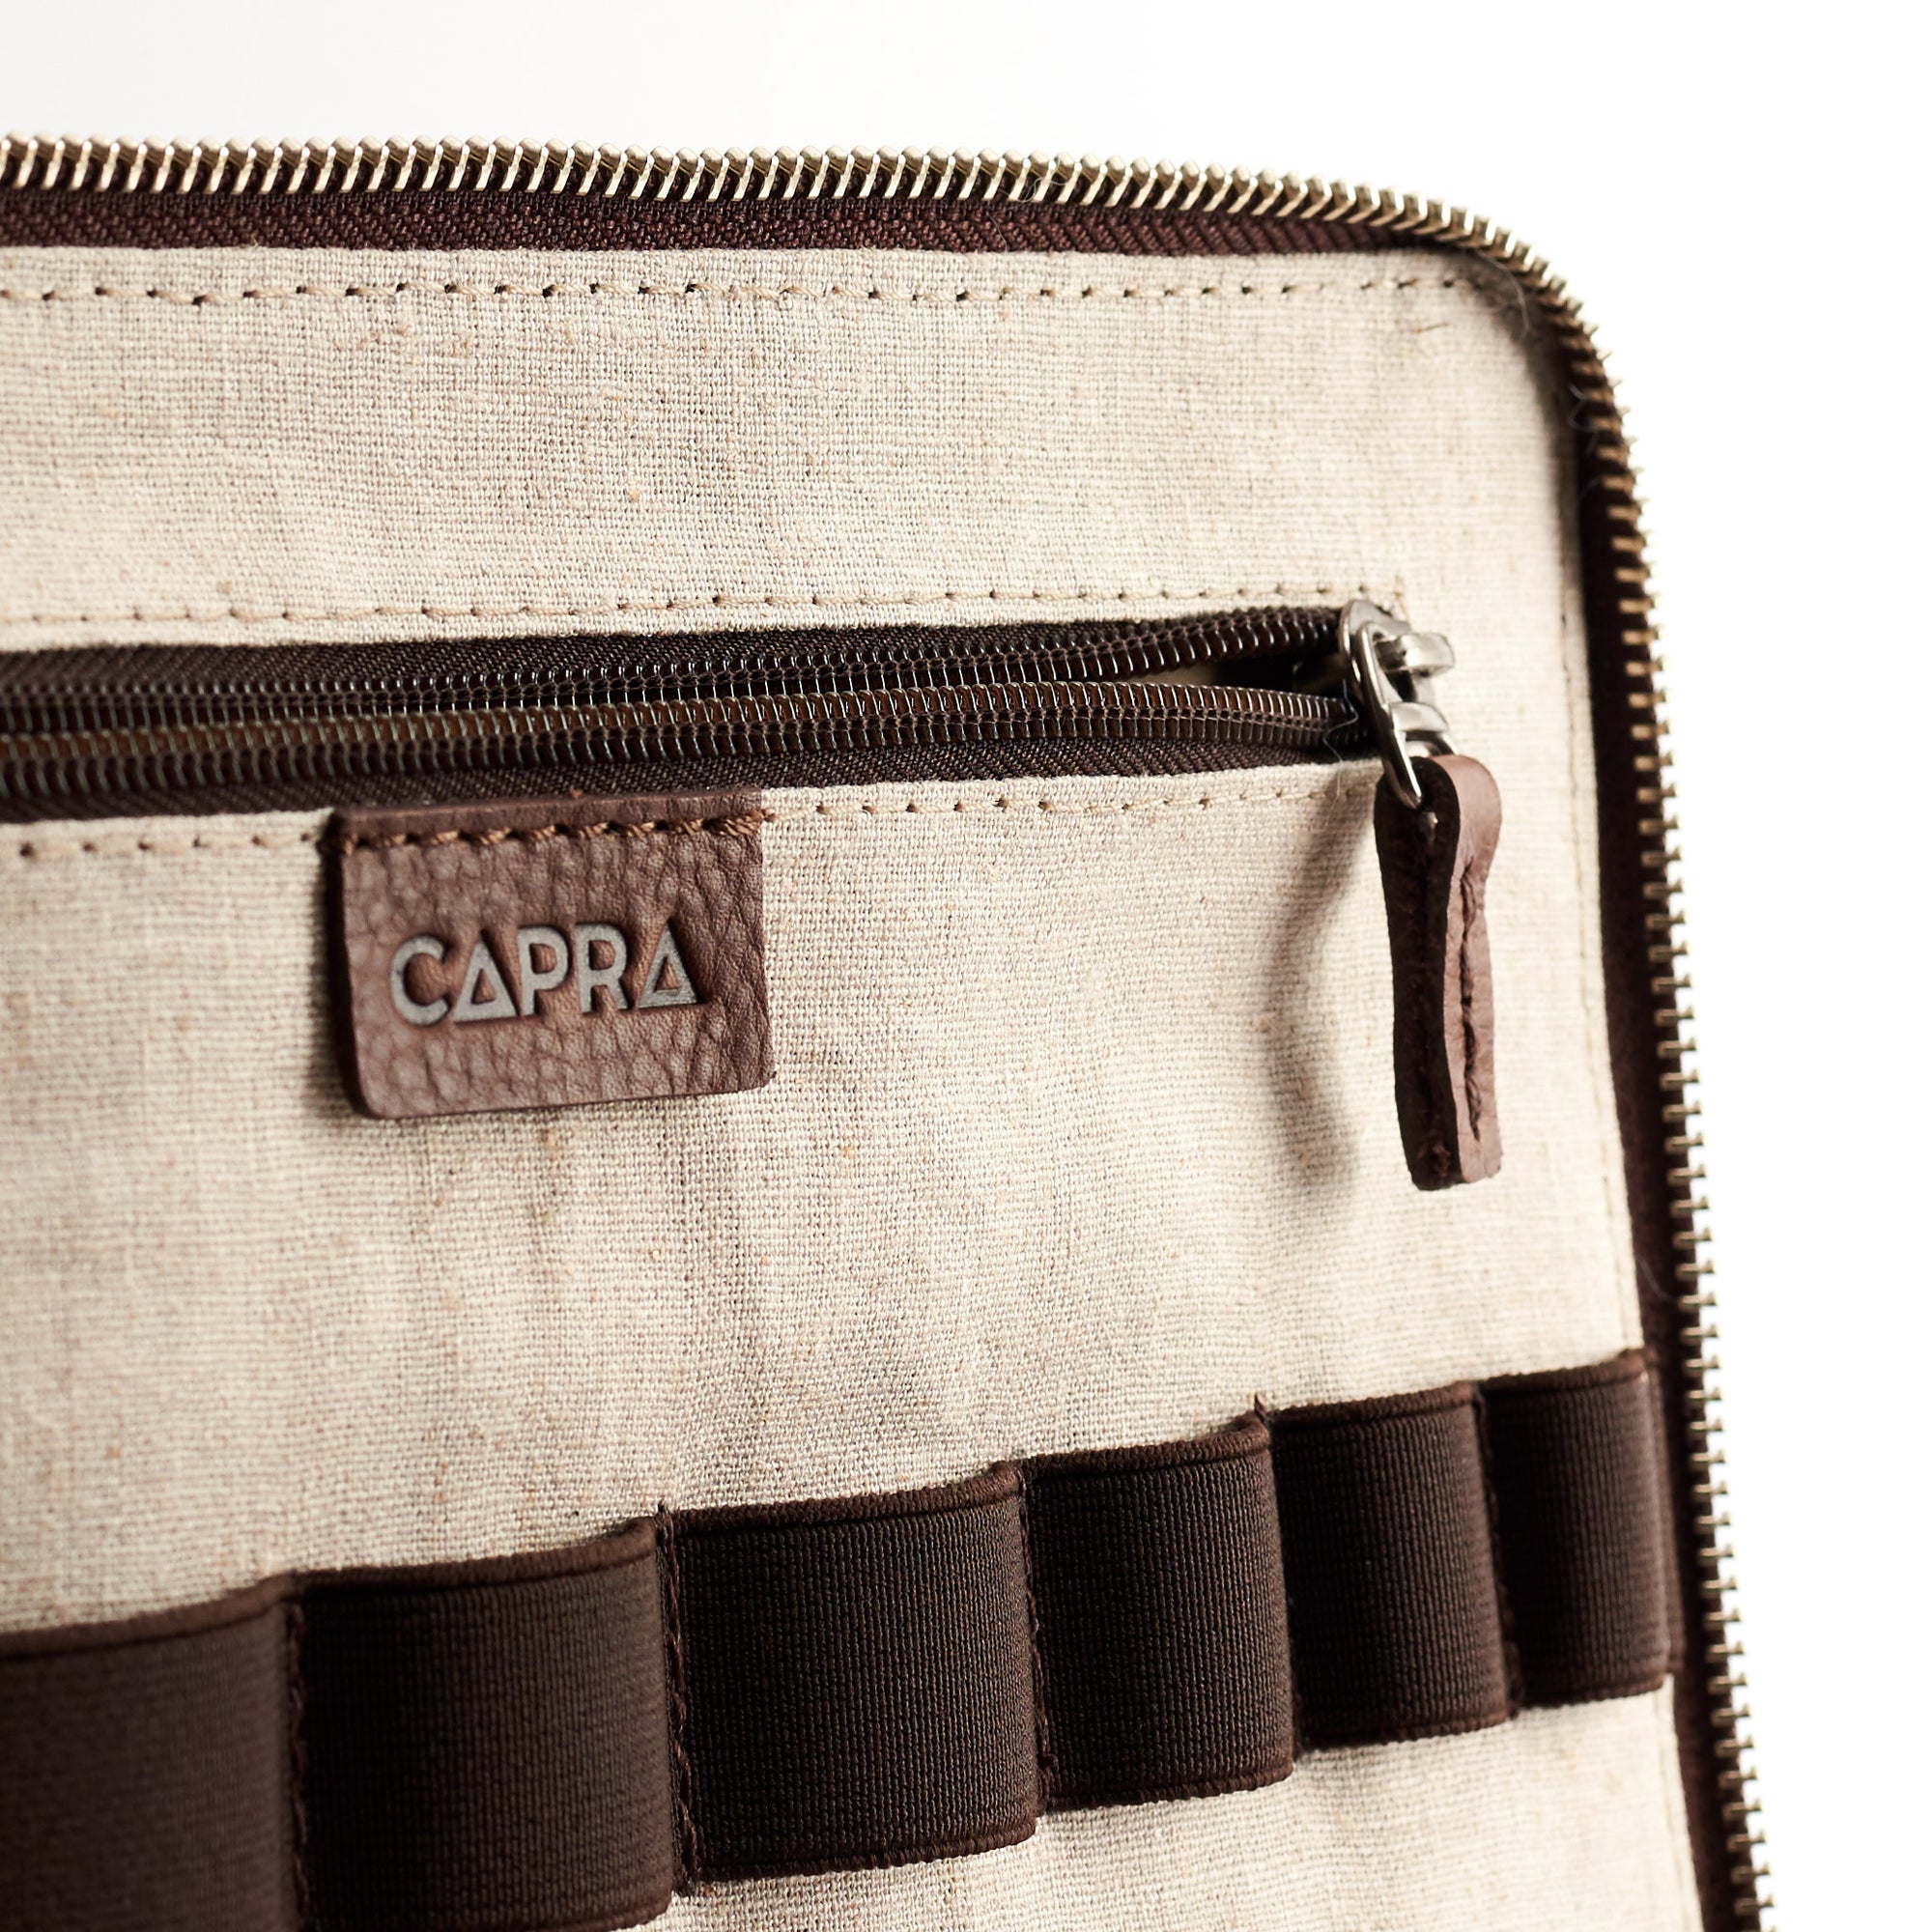 Concealed pocket for valuables. Best travel "tech organizer" brown  by Capra Leather